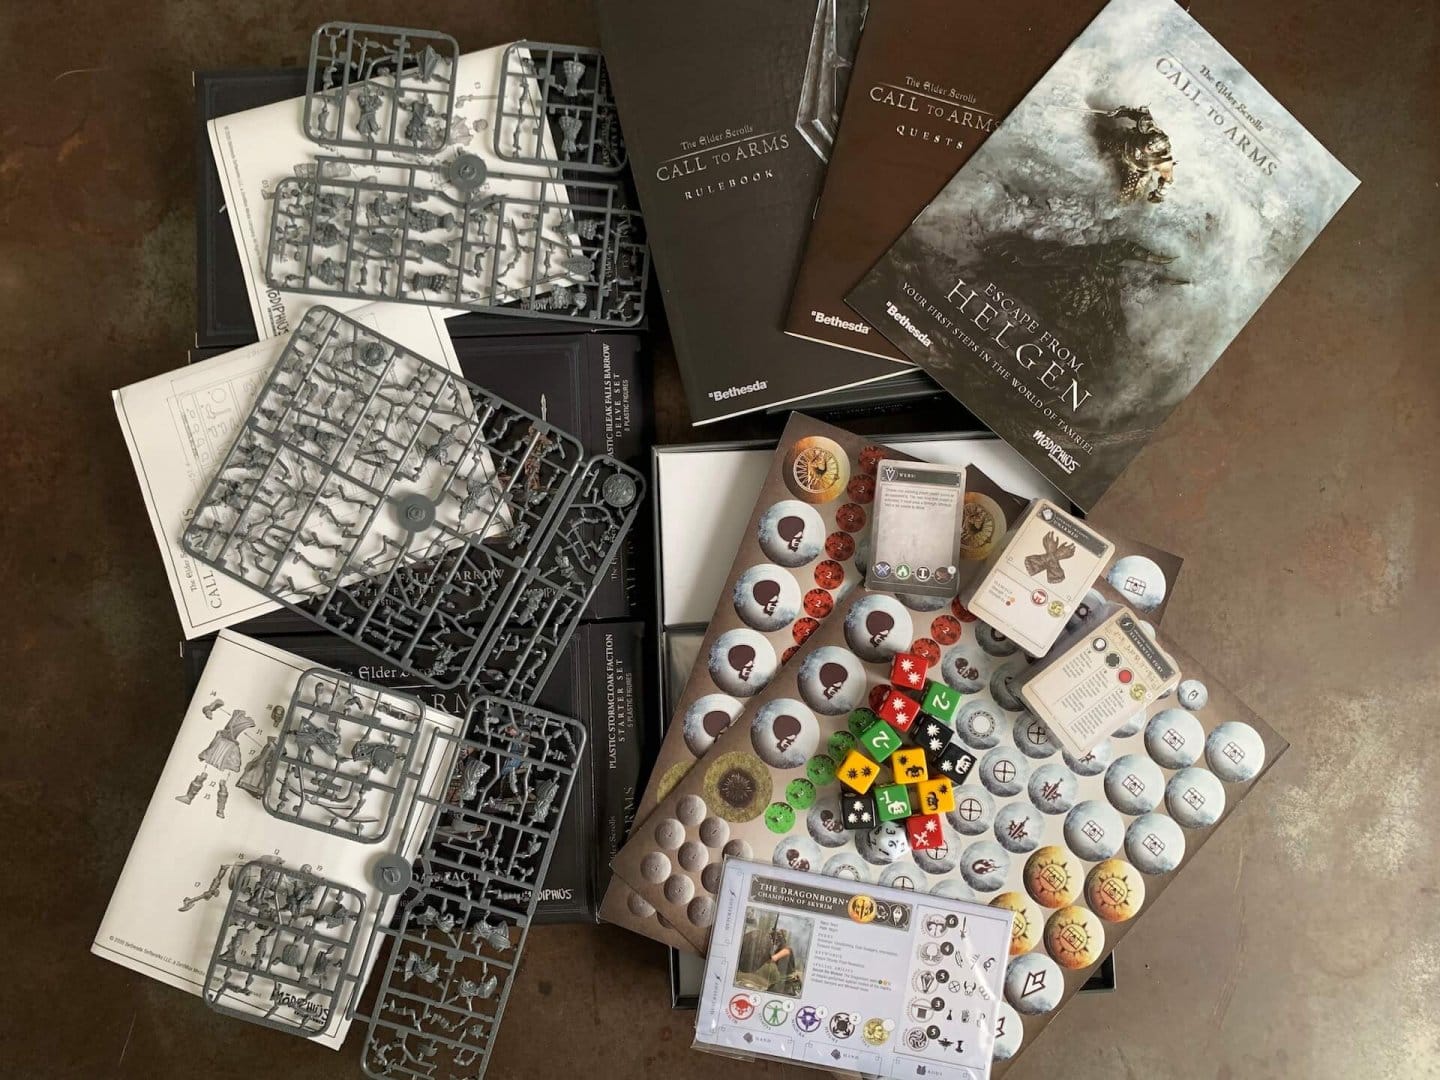 Components from Elder Scrolls: Call To Arms, including miniatures as they arrive in the box